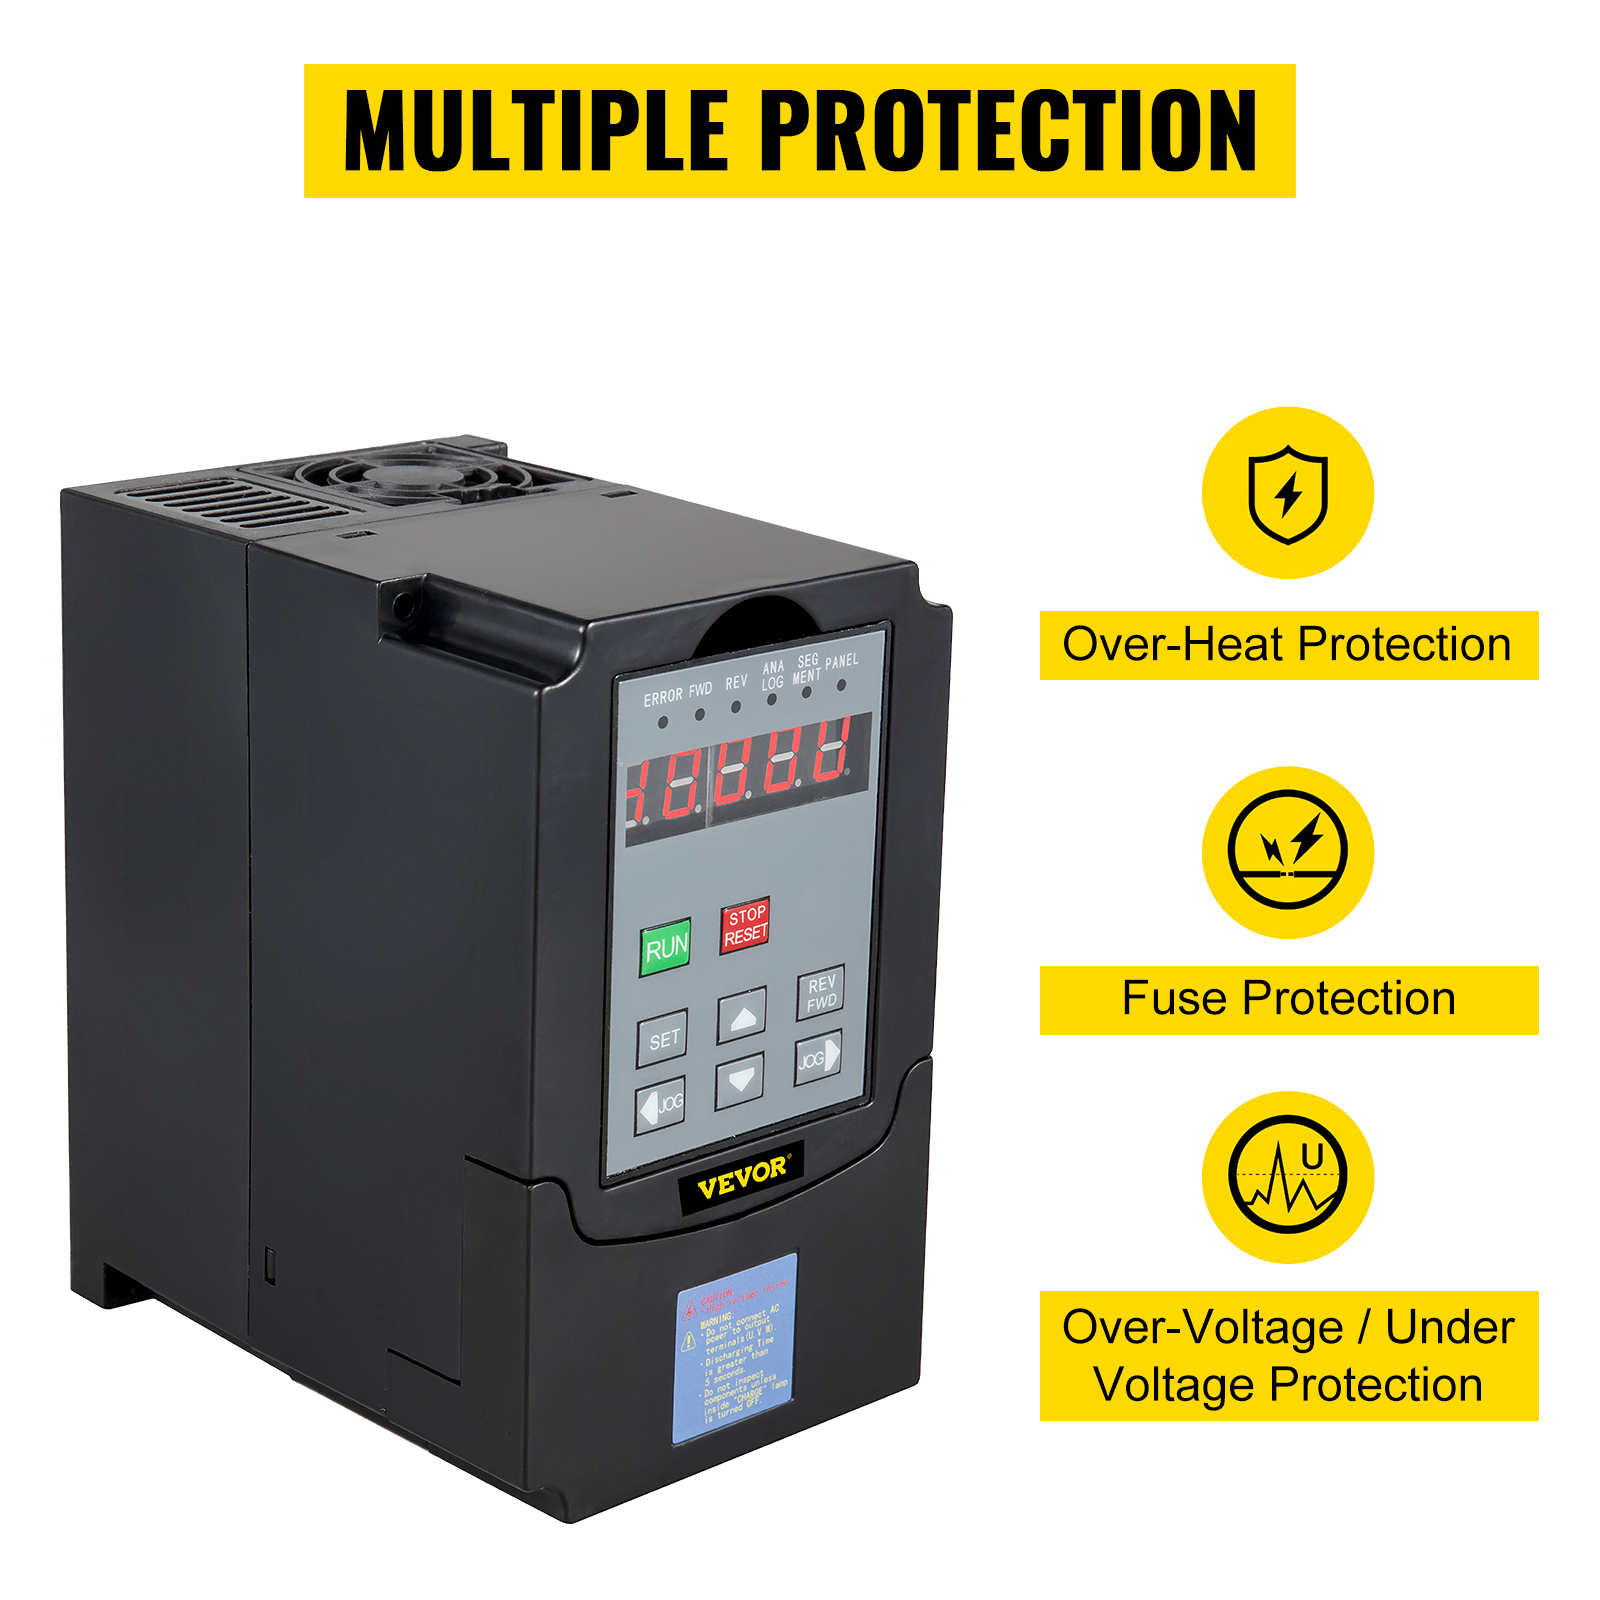 HIGH QUALITY VFD VARIABLE FREQUENCY DRIVE INVERTER 7.5KW 220V 10HP 34A 